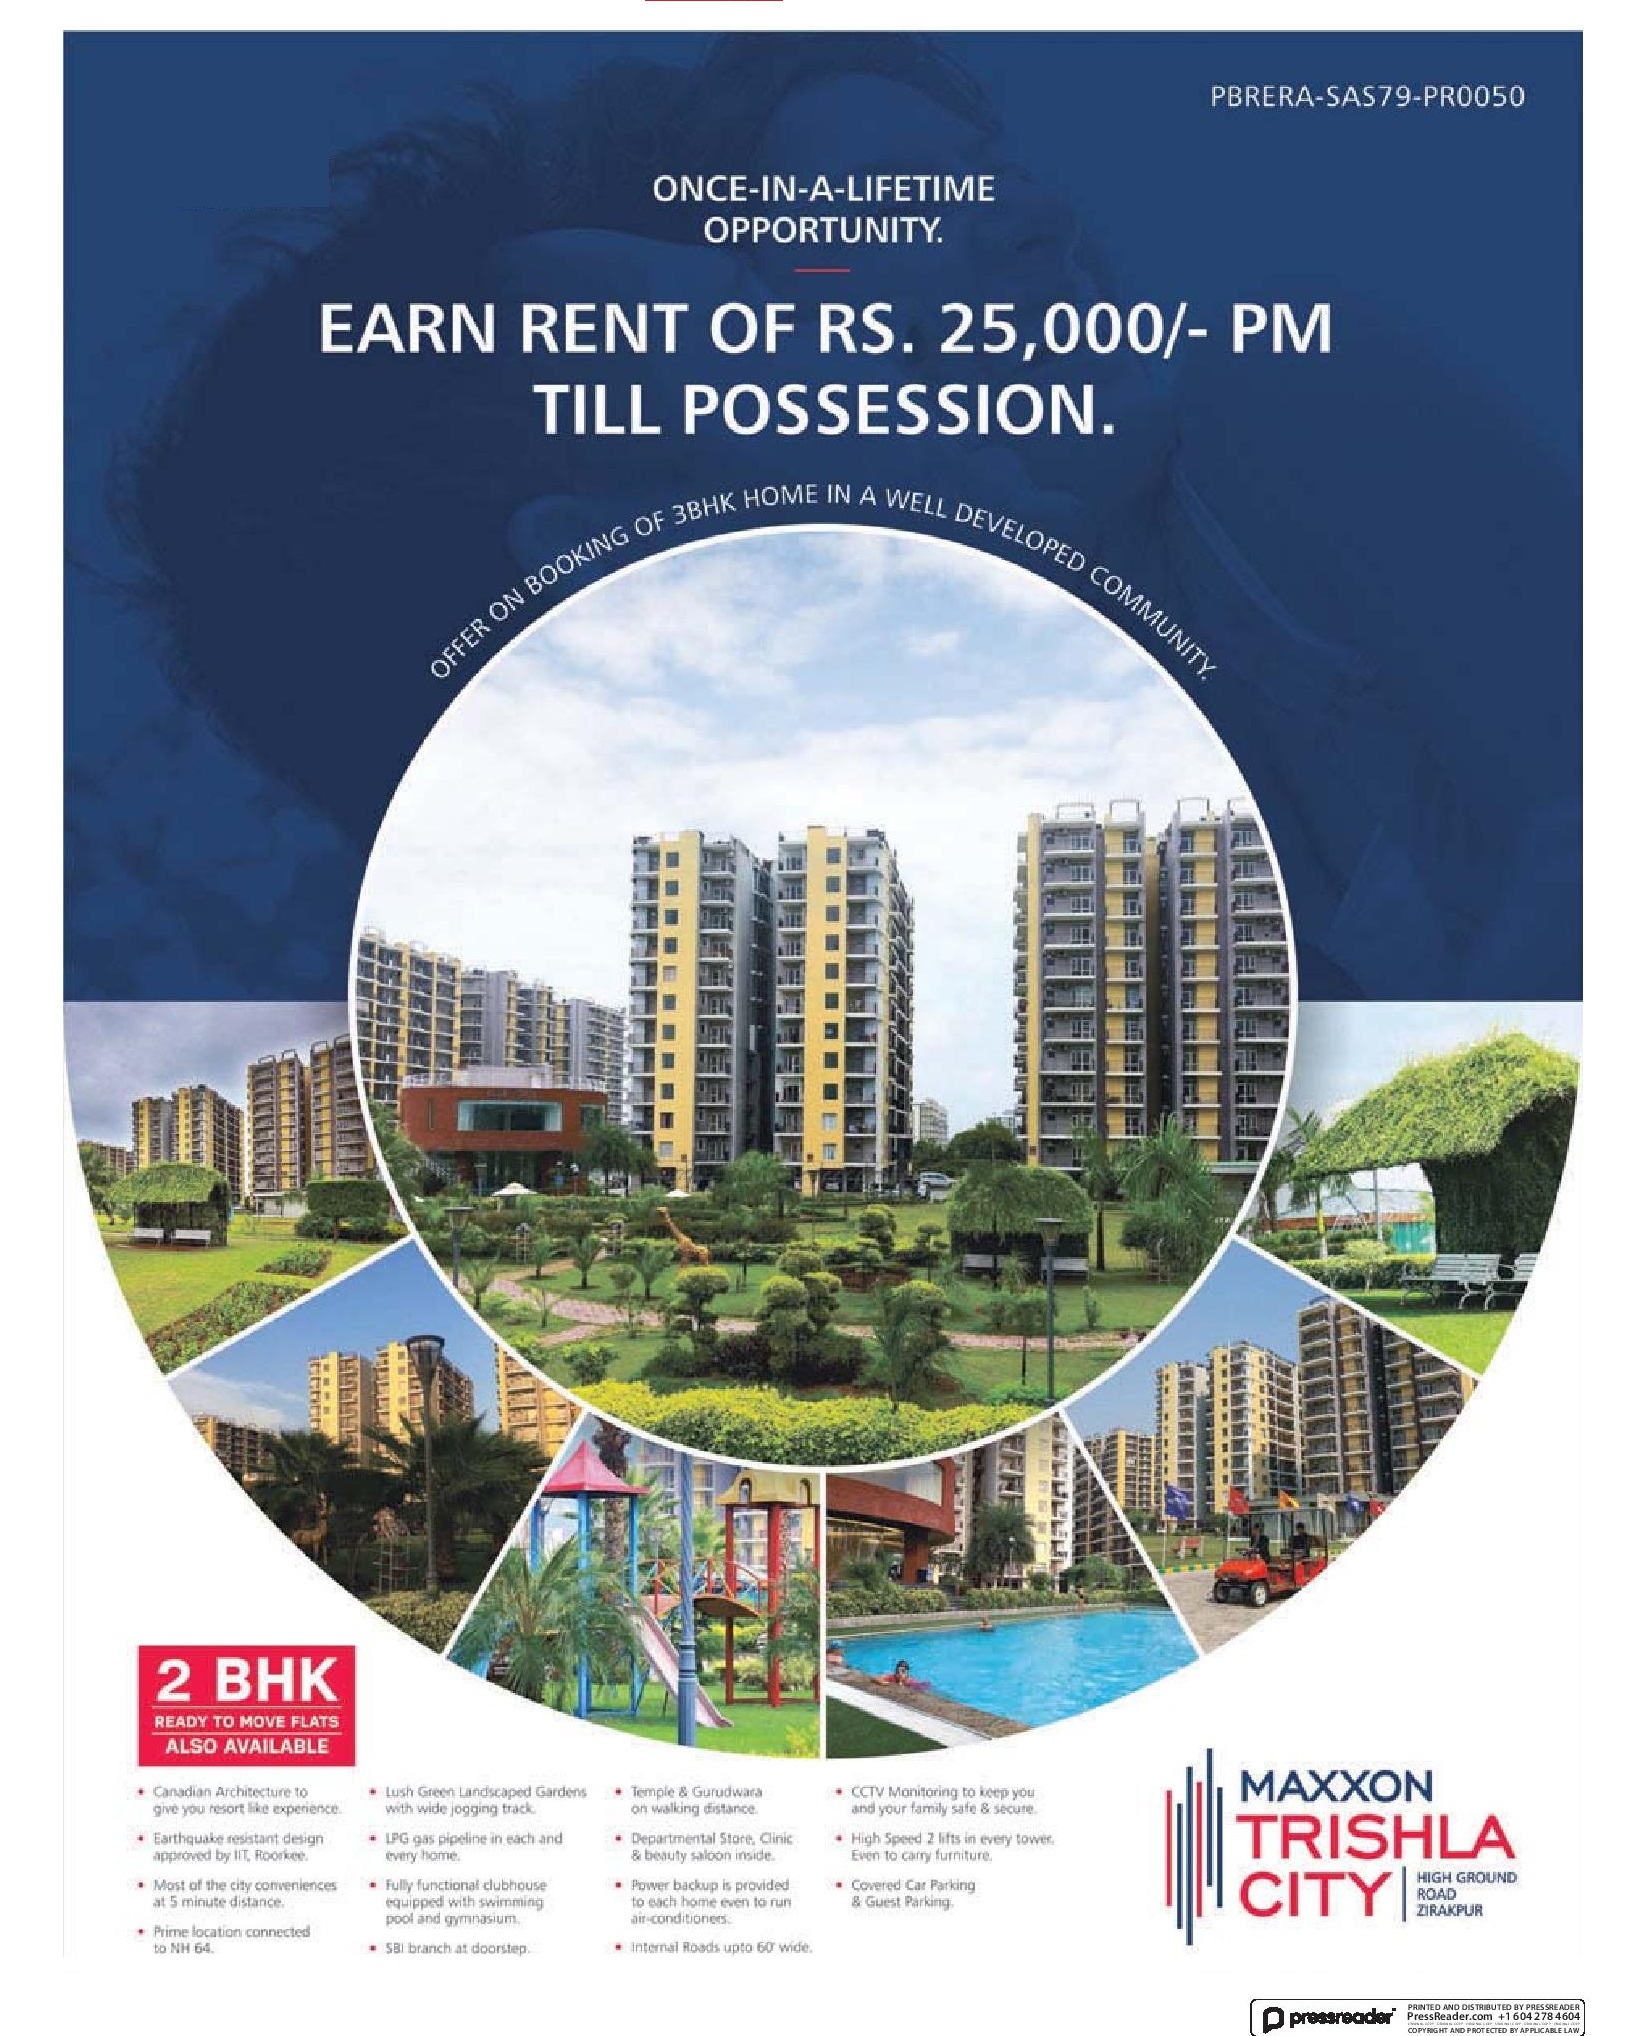 Earn rent of Rs 25000 per month till possession at Trishla City in Chandigarh